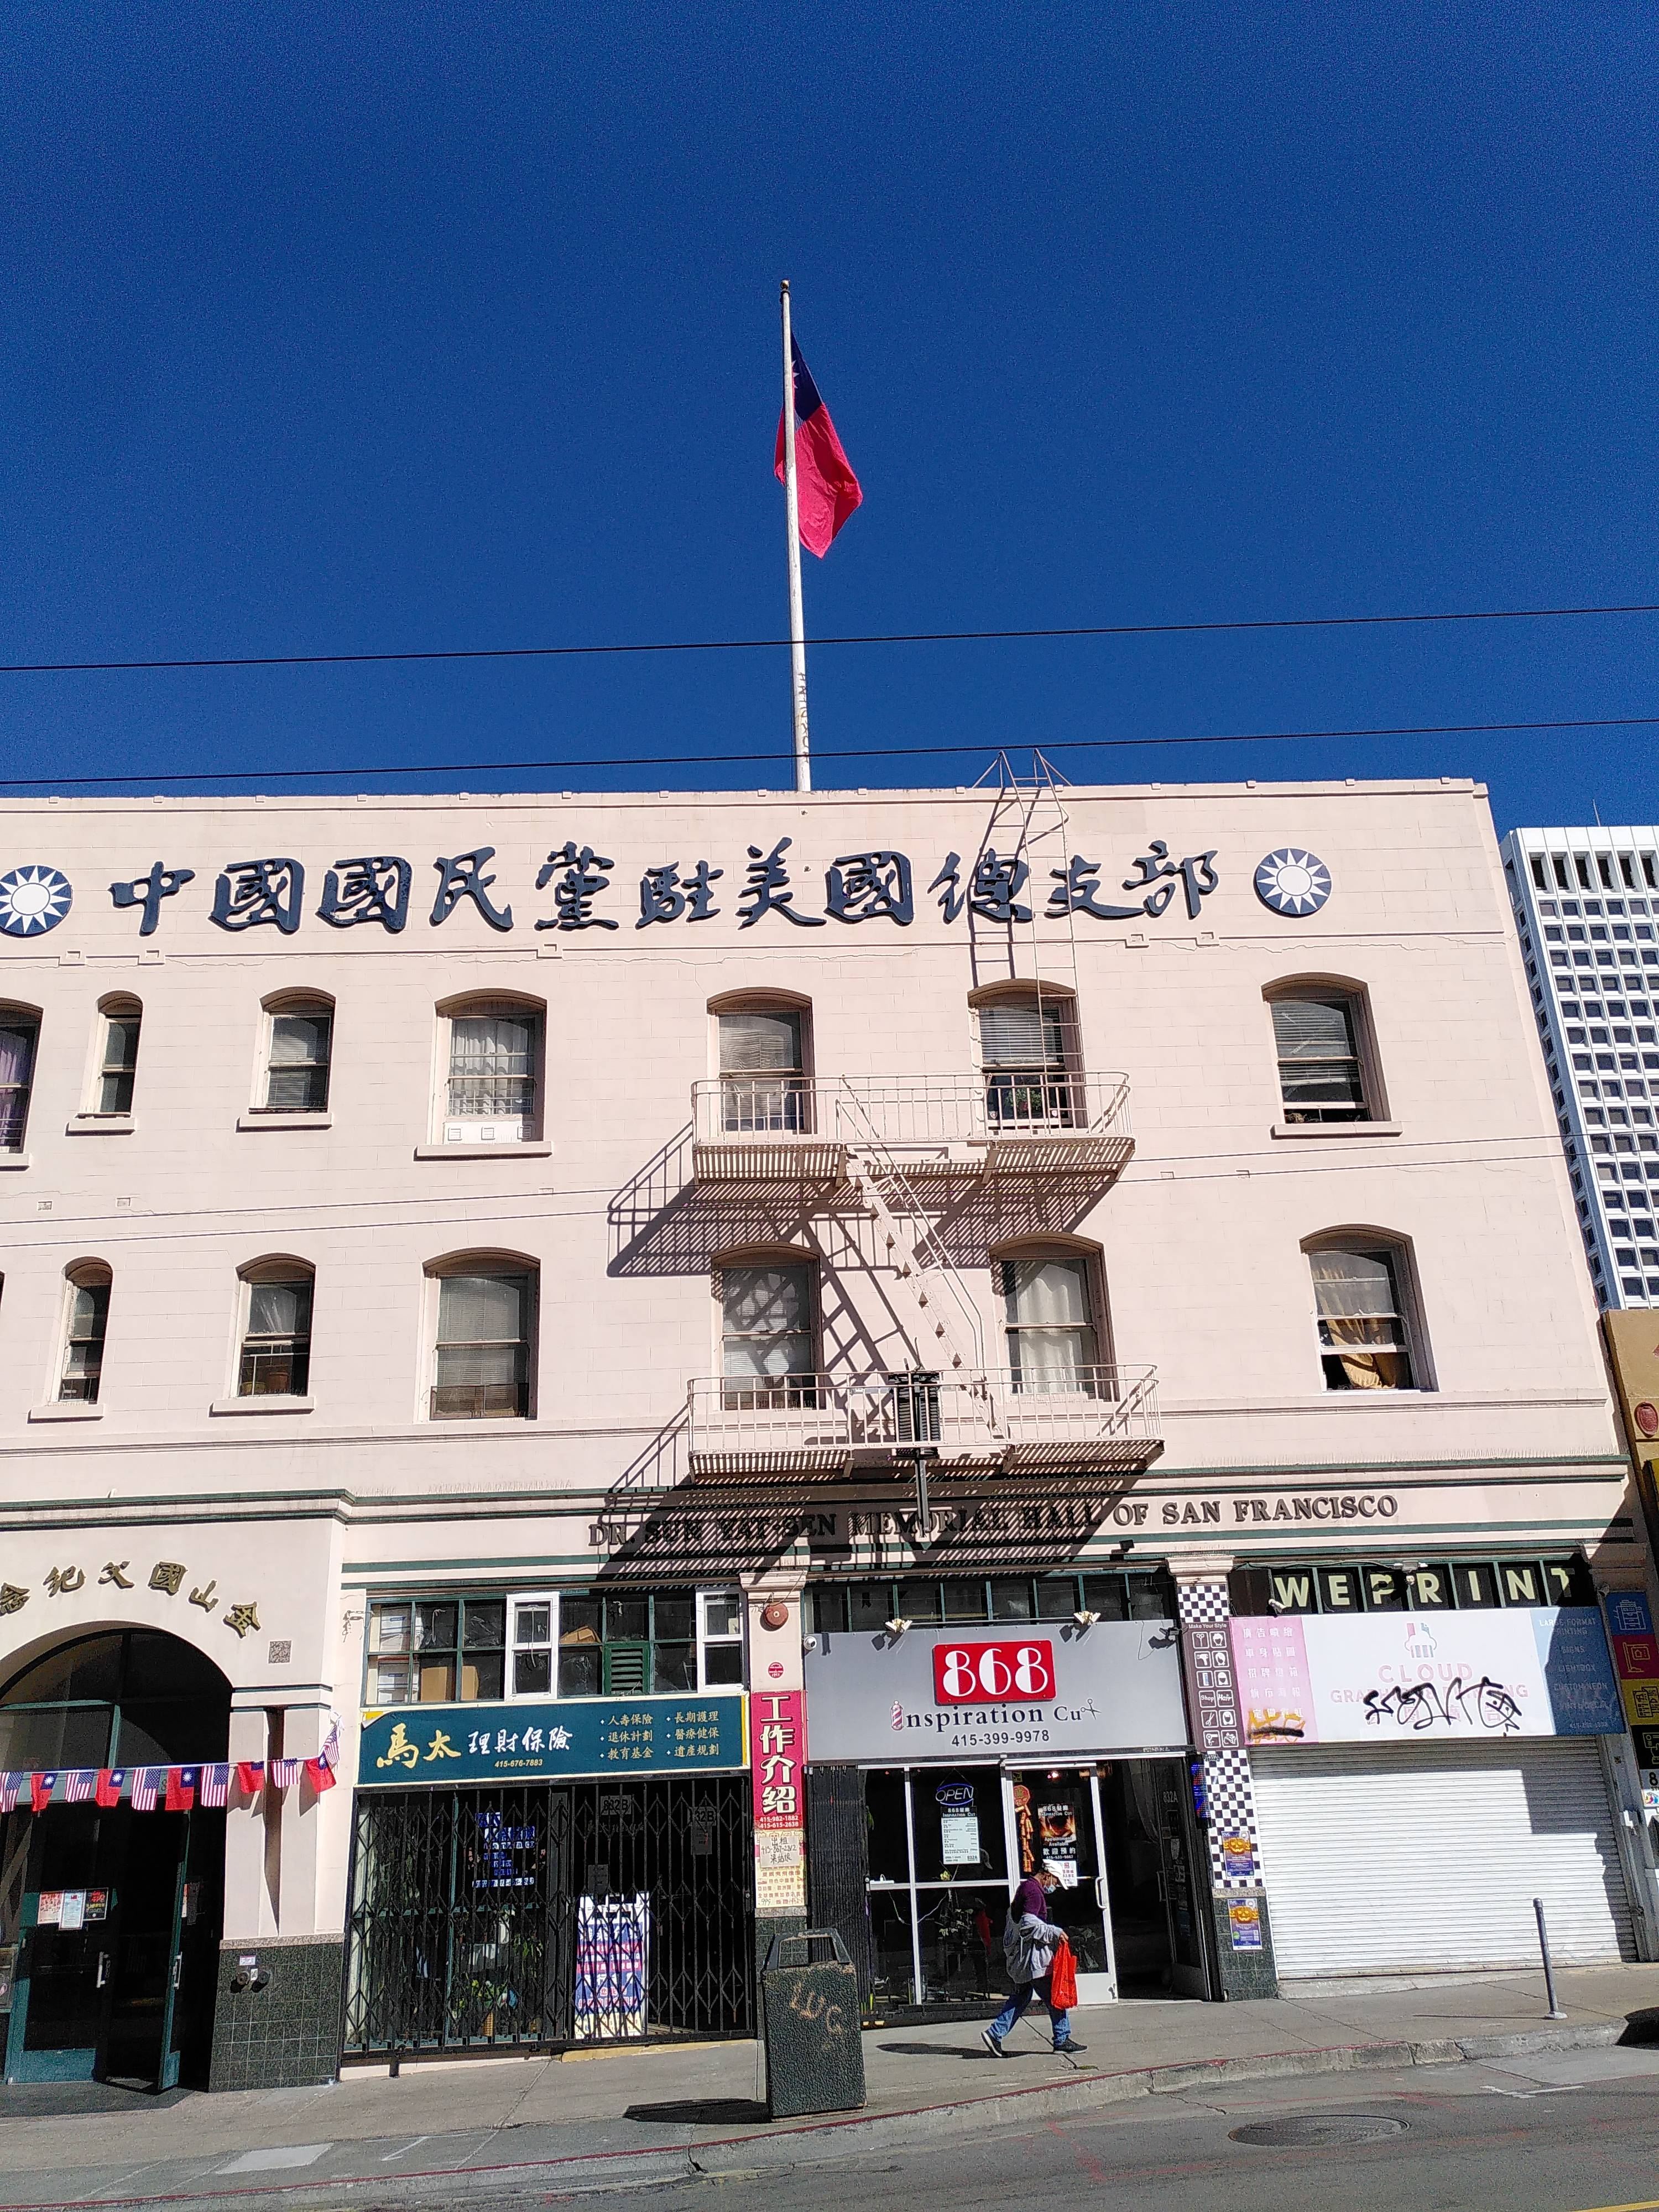 A white house with chinese characters and what looks like the Taiwanese flag on a flag pole.